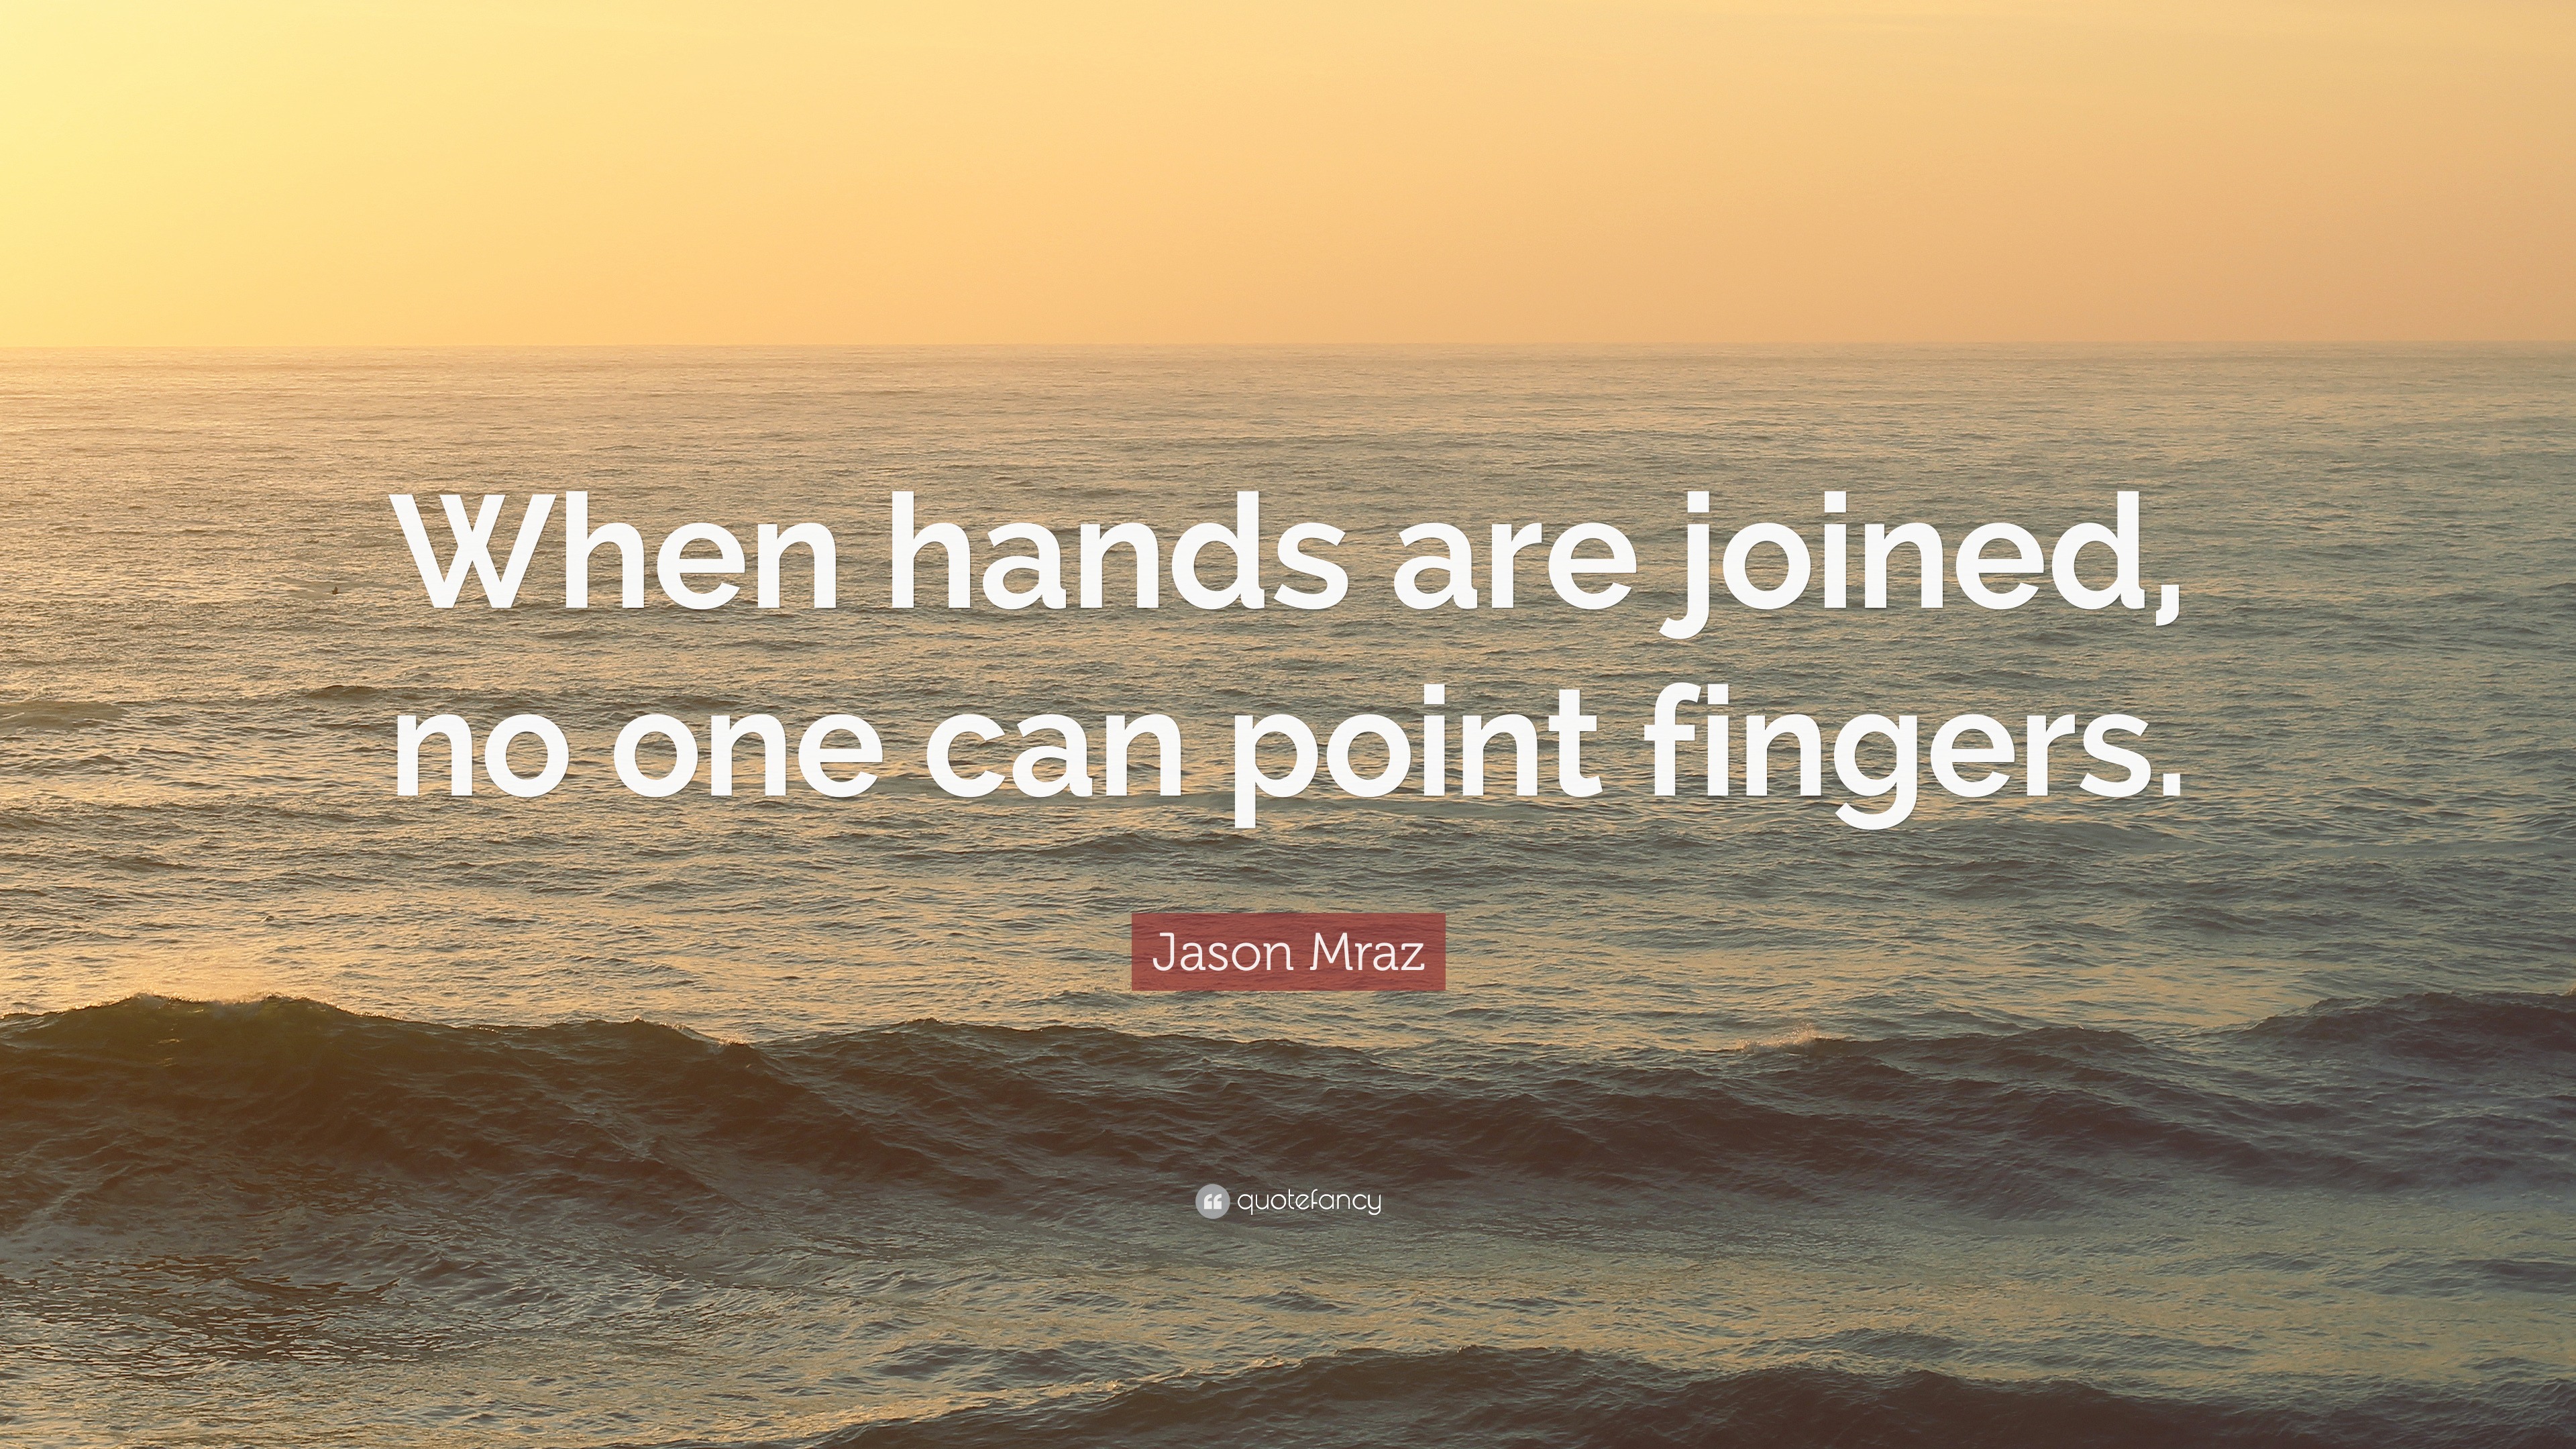 Jason Mraz Quote: "When hands are joined, no one can point fingers." (12 wallpapers) - Quotefancy